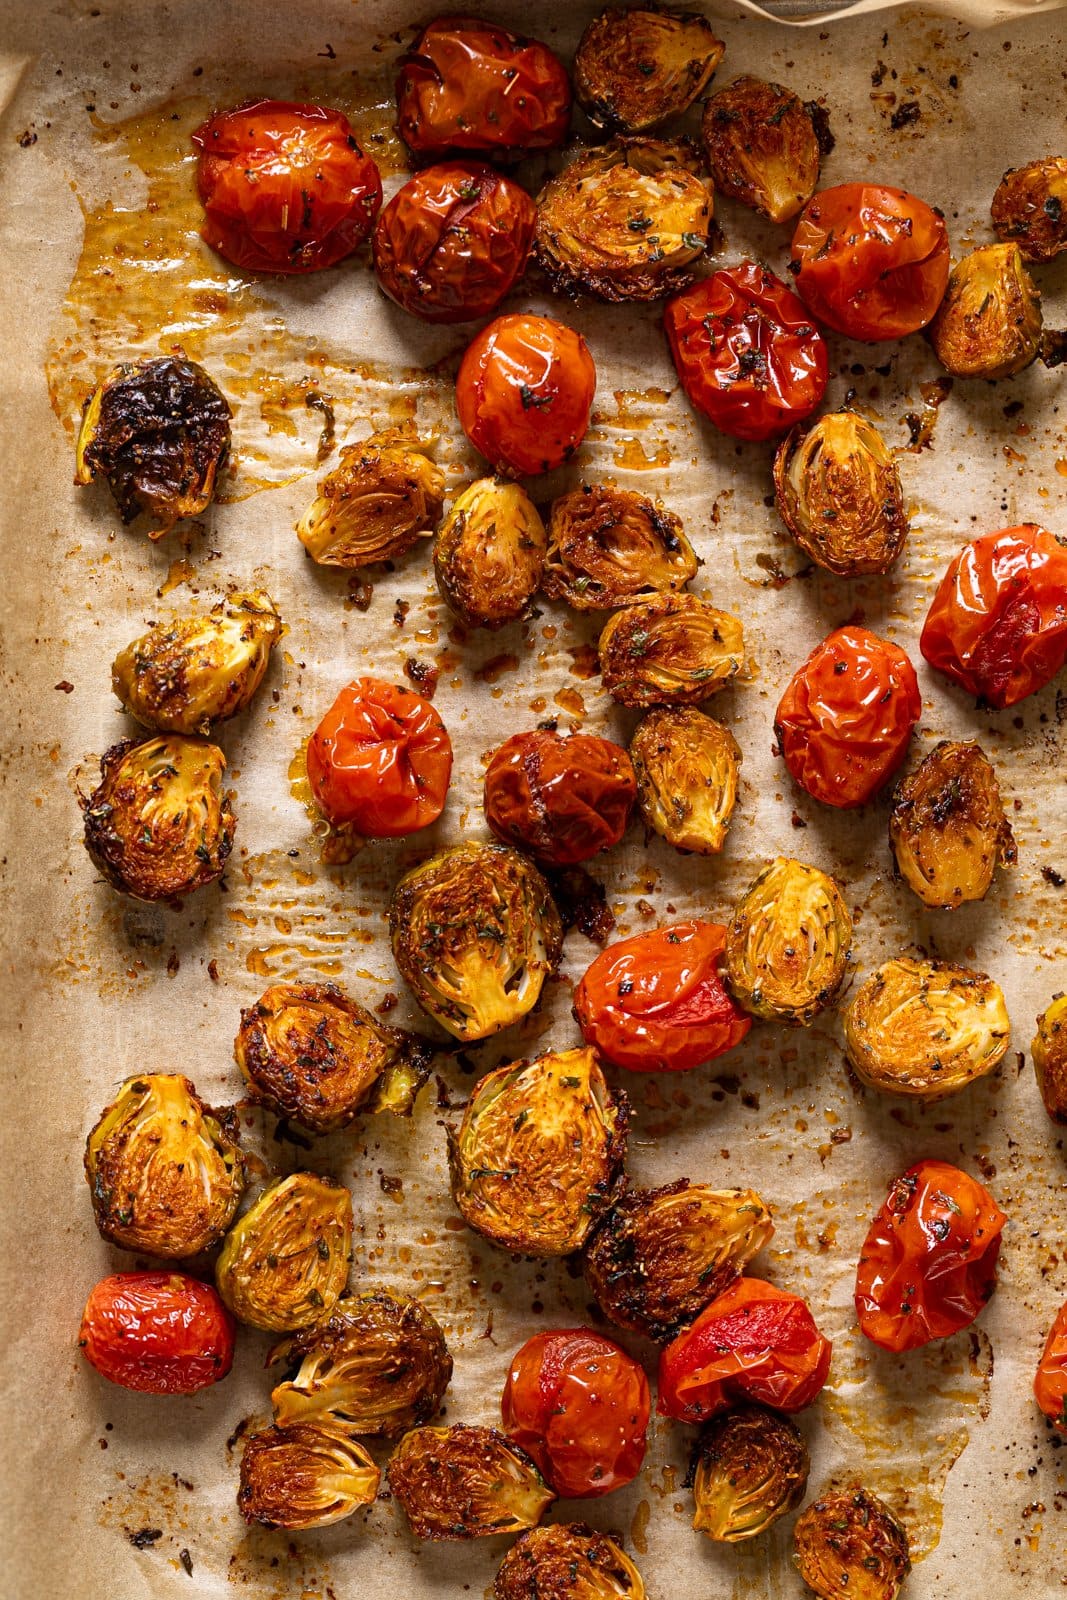 Roasted brussels sprouts and tomatoes on parchment paper